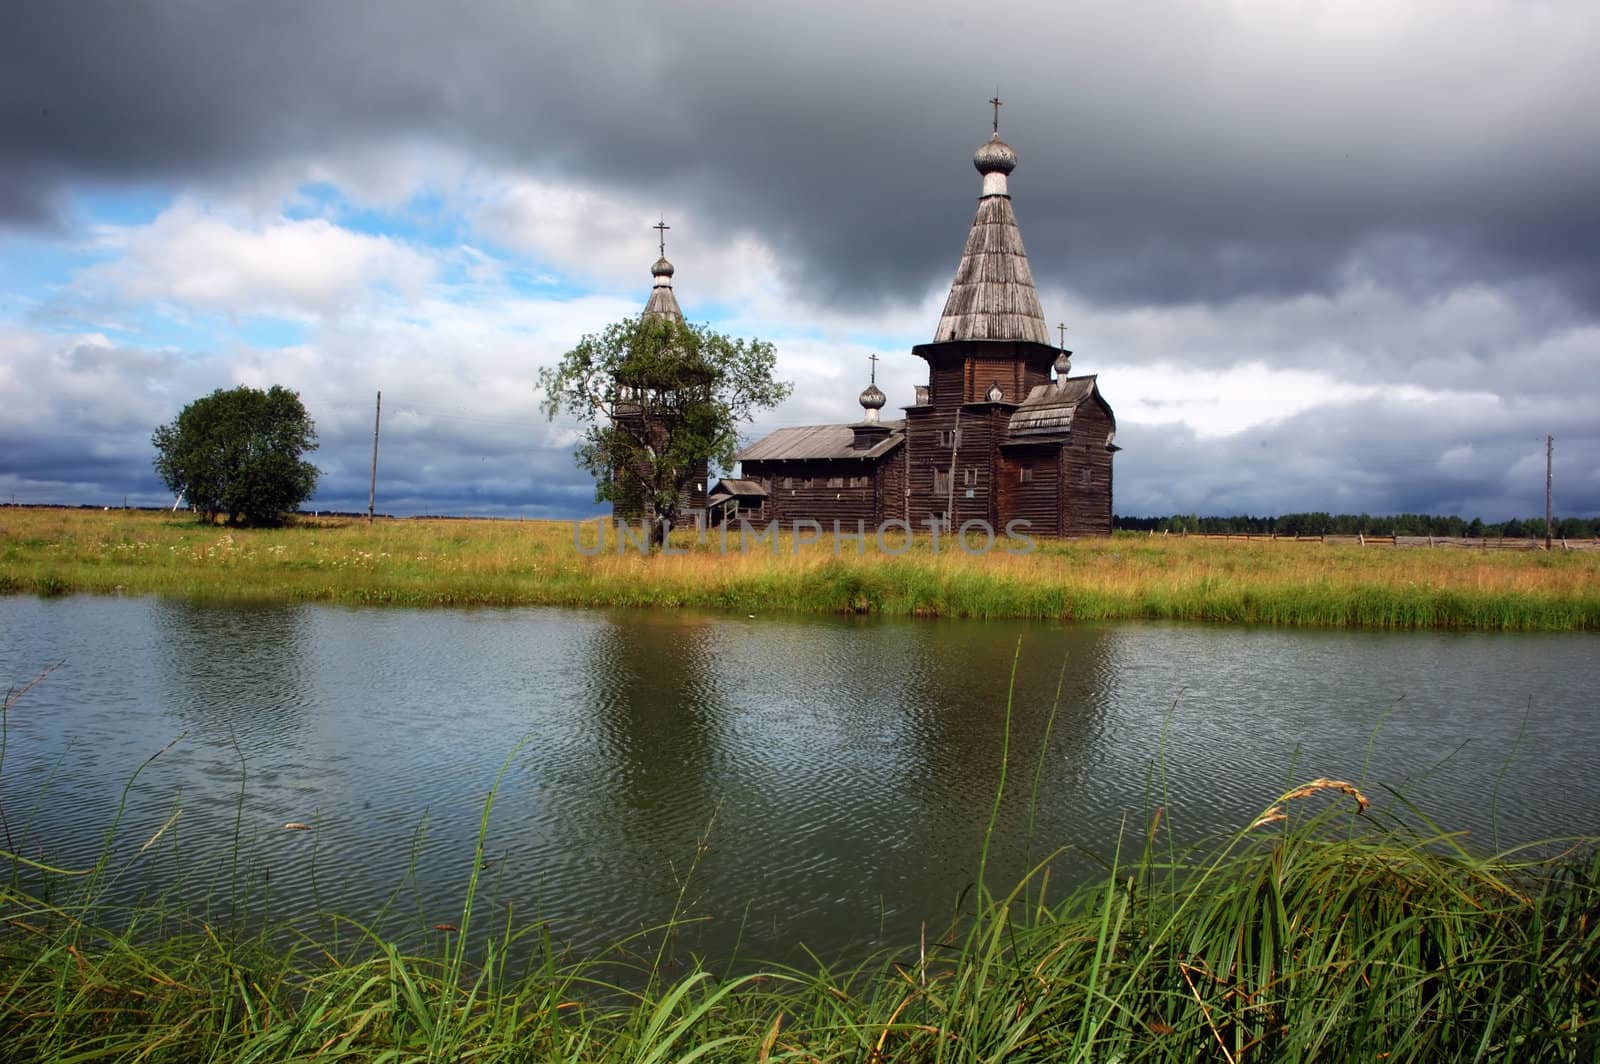 Ancient wooden russian church beyond the river, storm-clouds in sky, north Russia